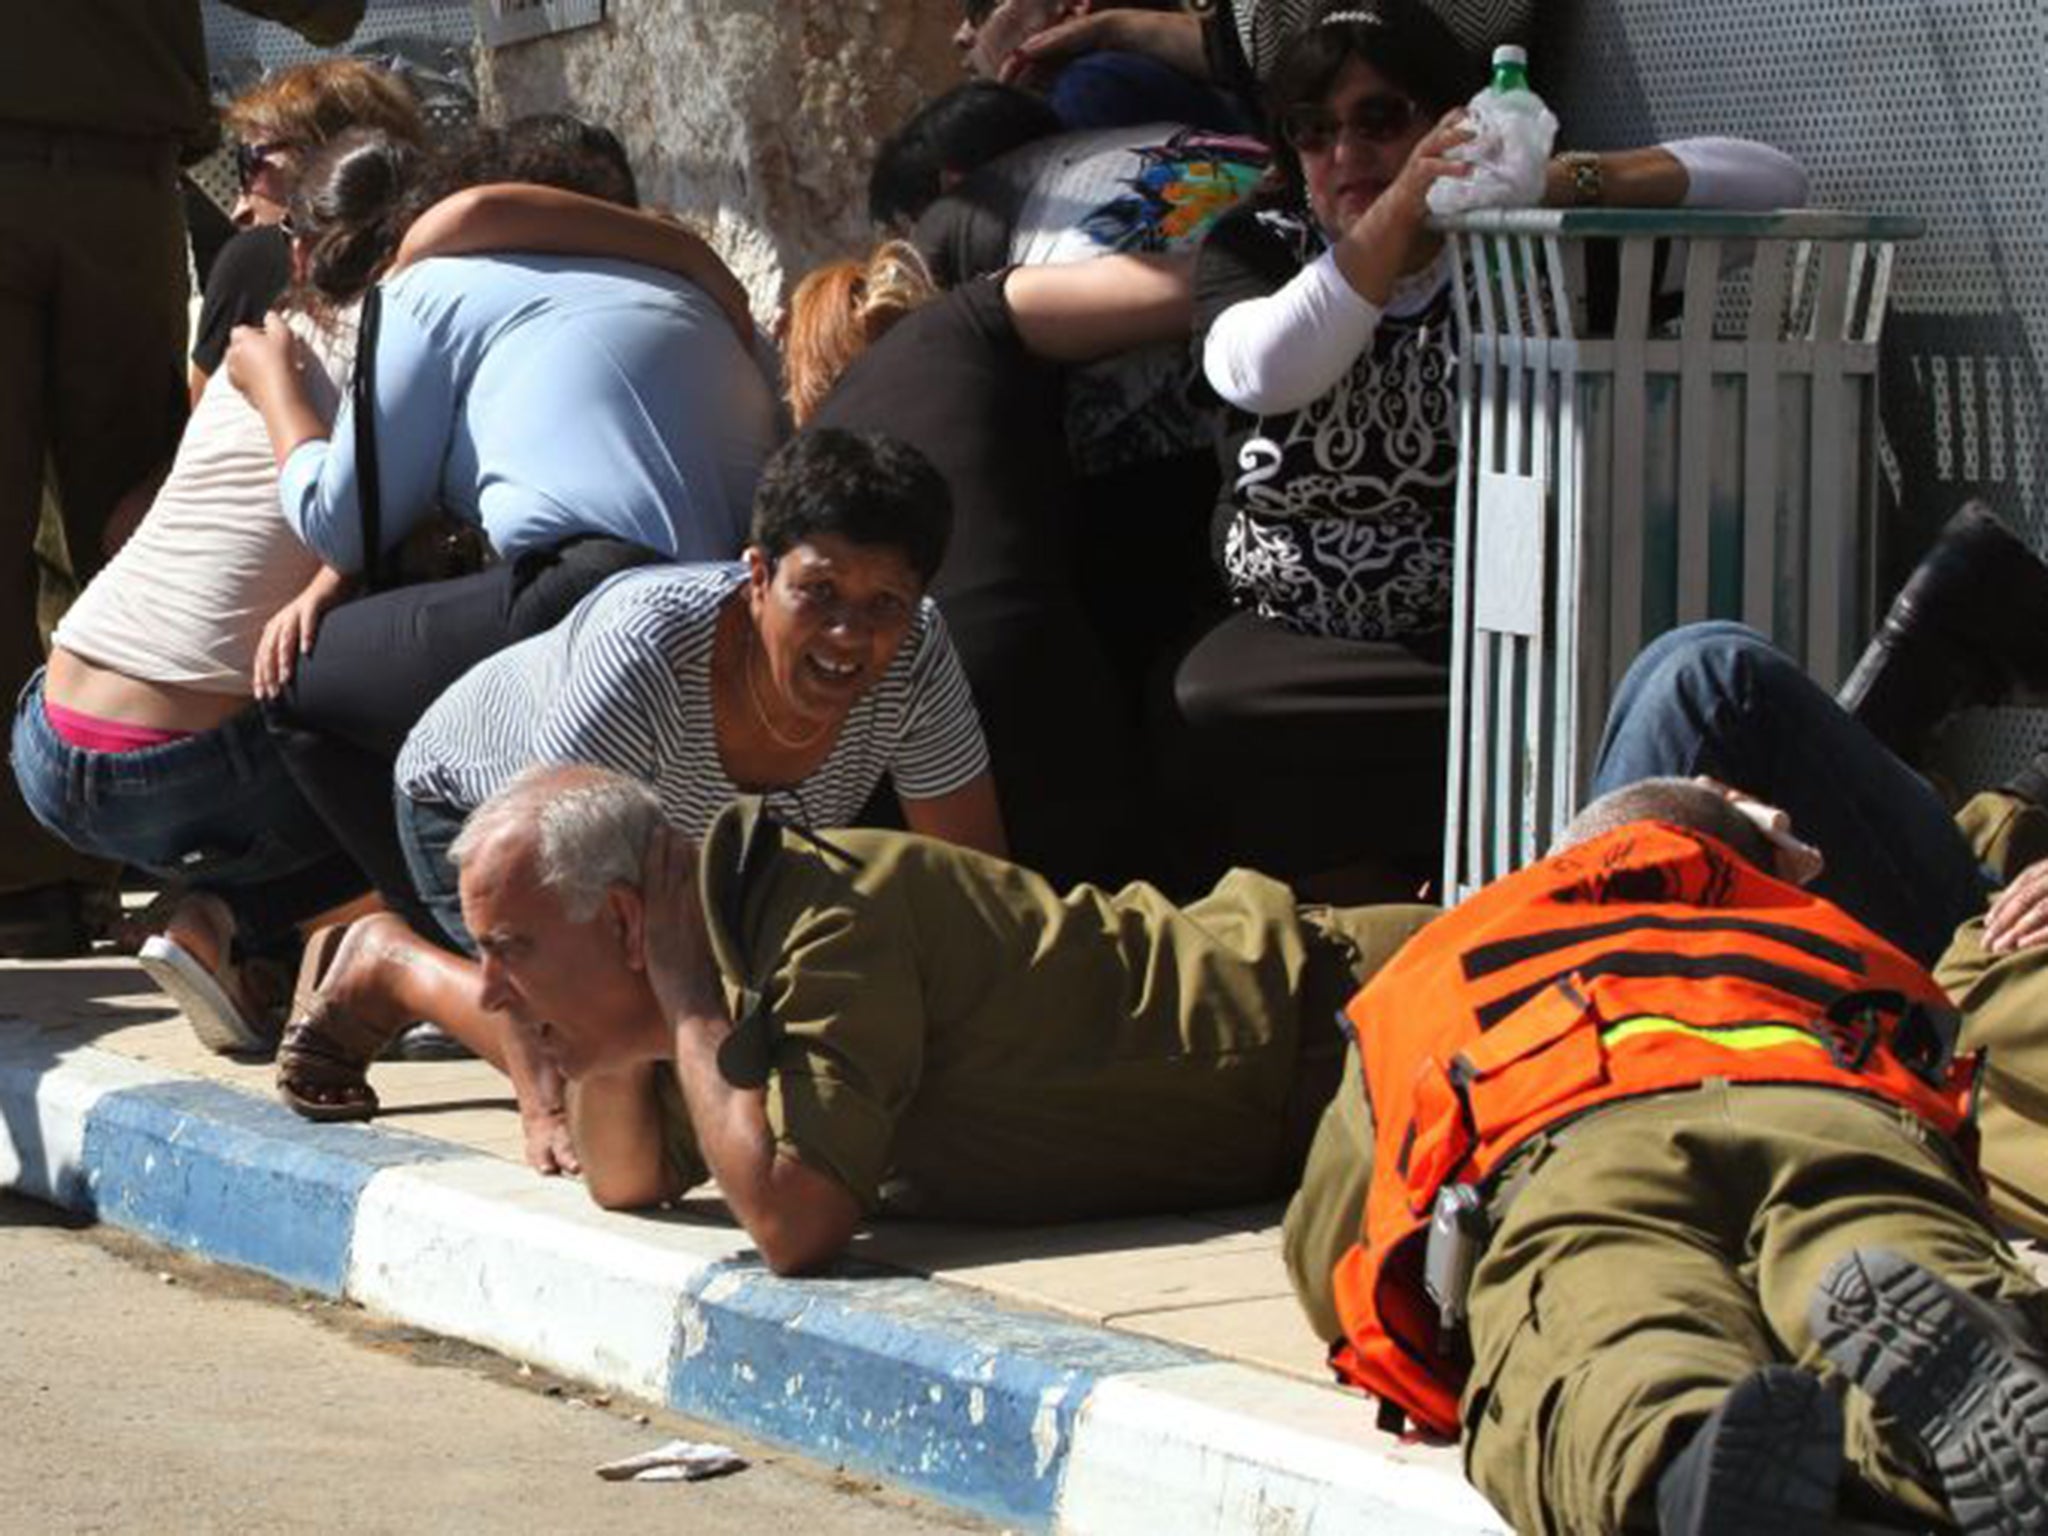 Israelis take cover from a rocket attack from Palestinian militants on the Gaza Strip during the funeral last July of Israeli soldier Corporal Meidan Maymon Biton, 20, killed in a mortar attack